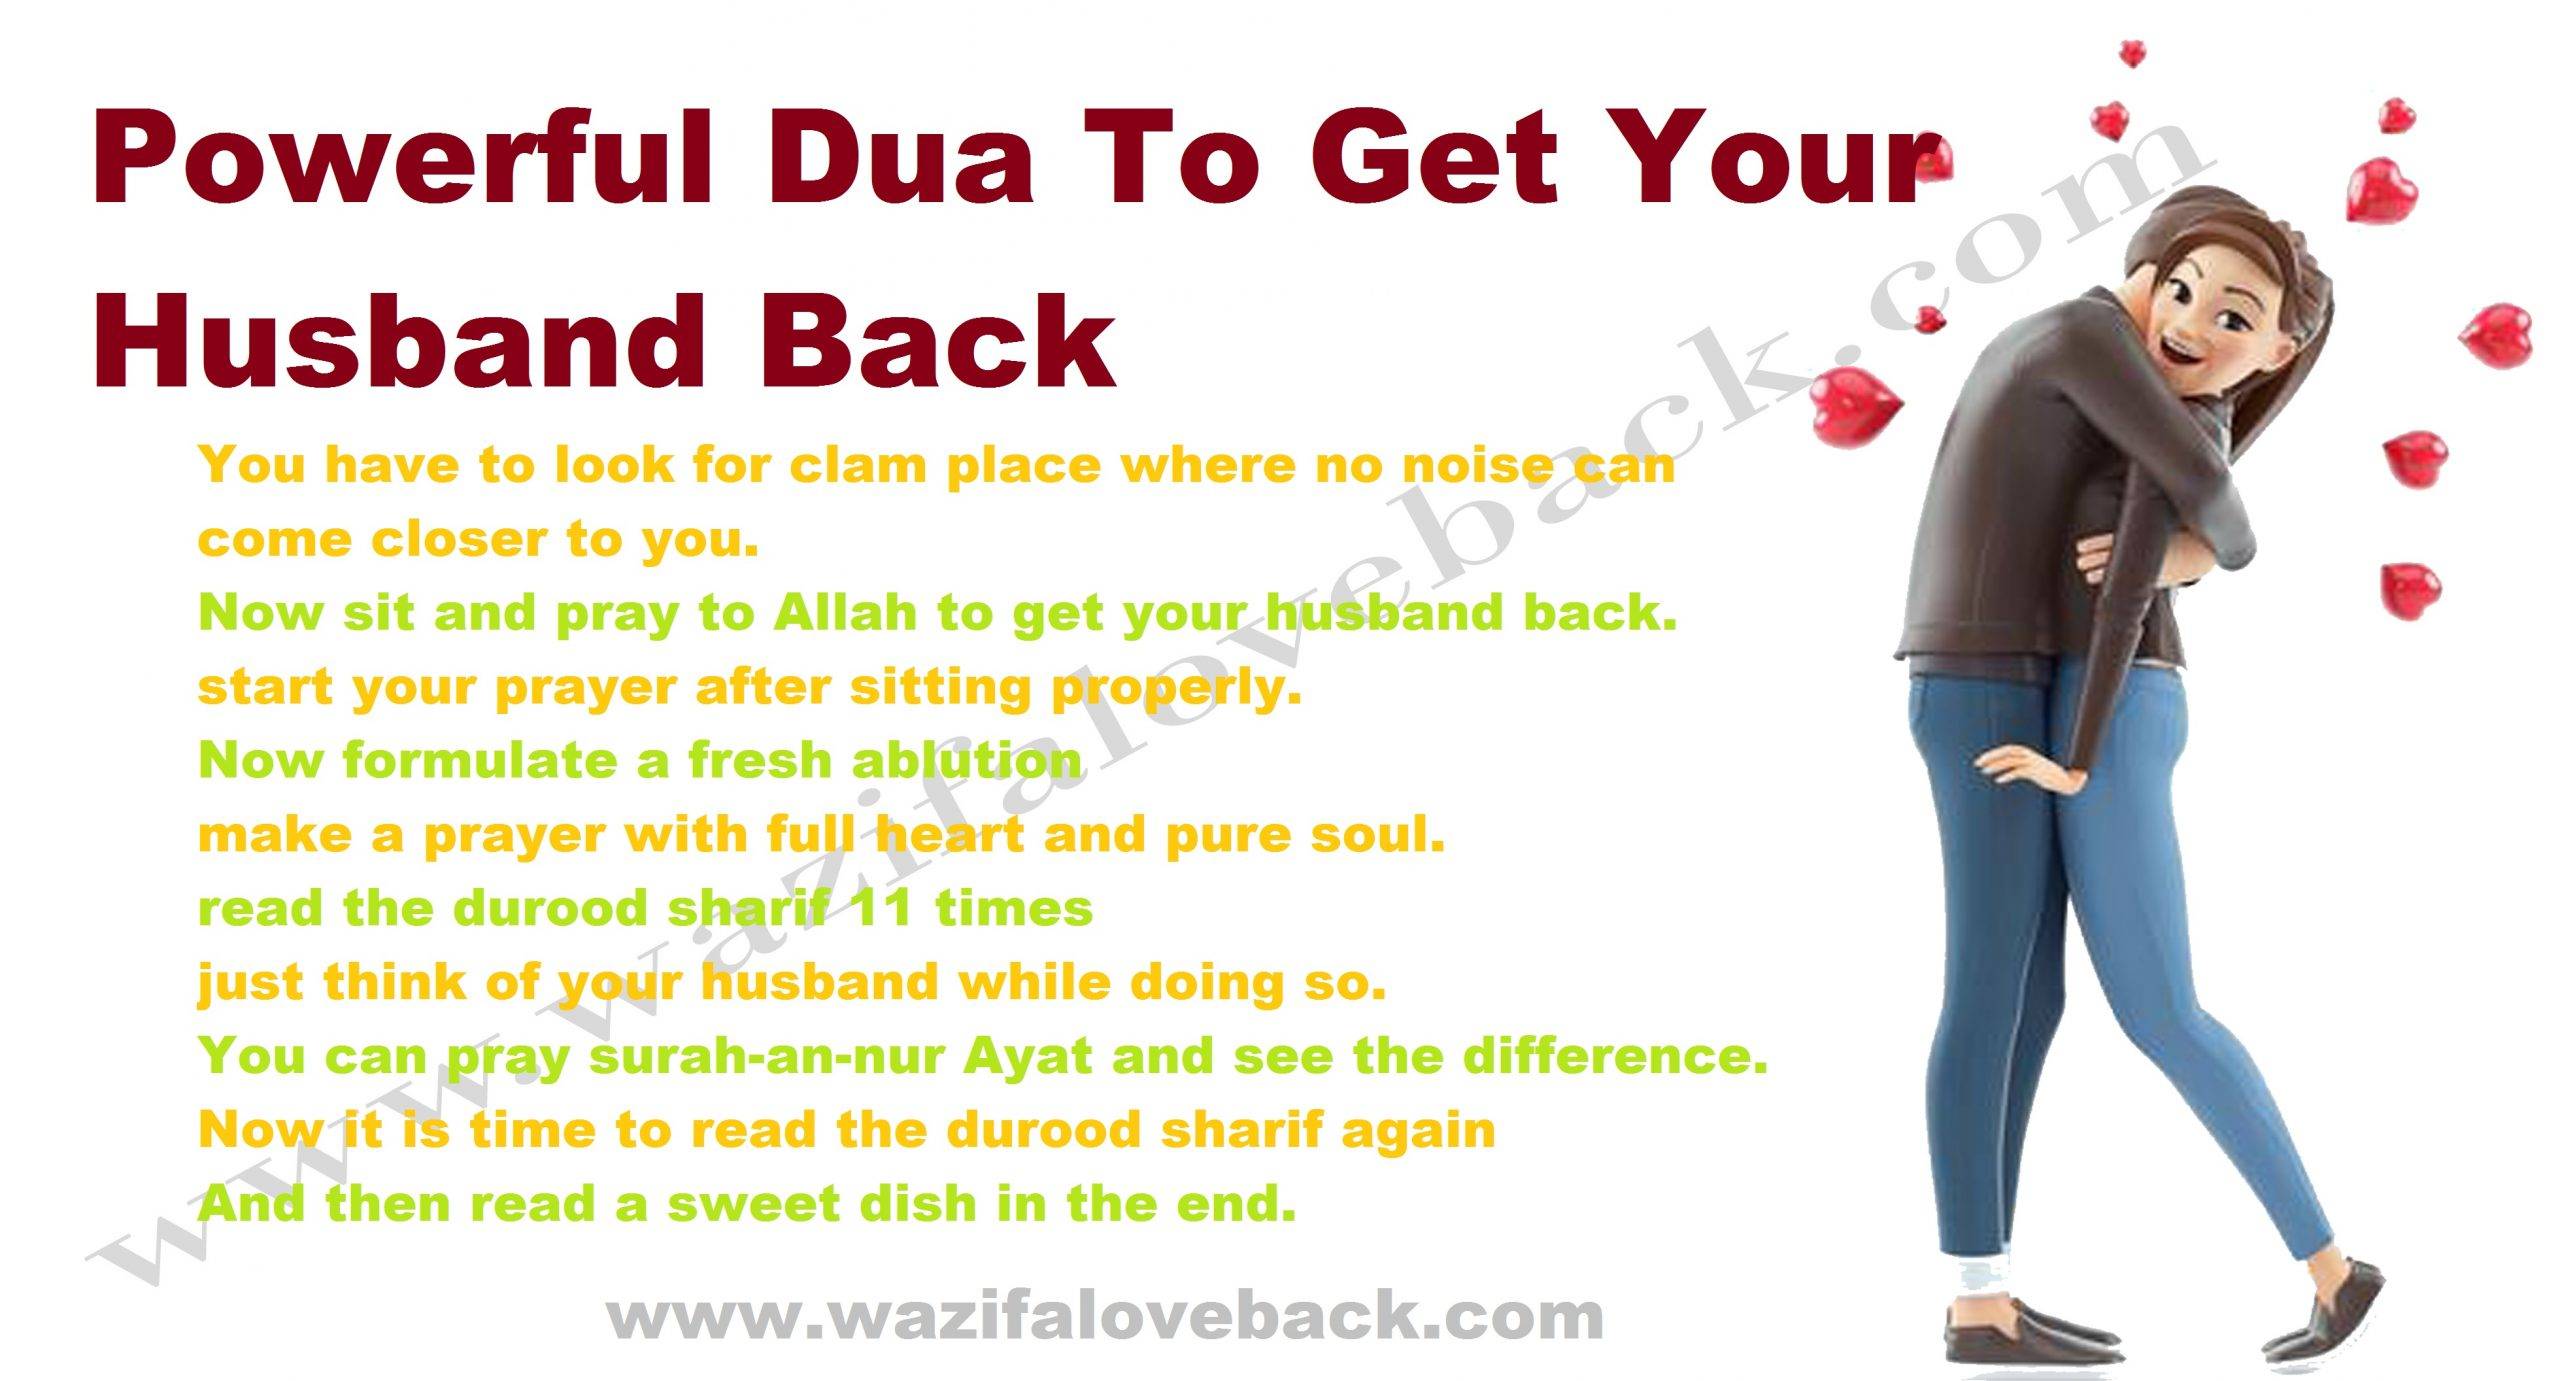 Powerful Dua To Get Your Husband Back